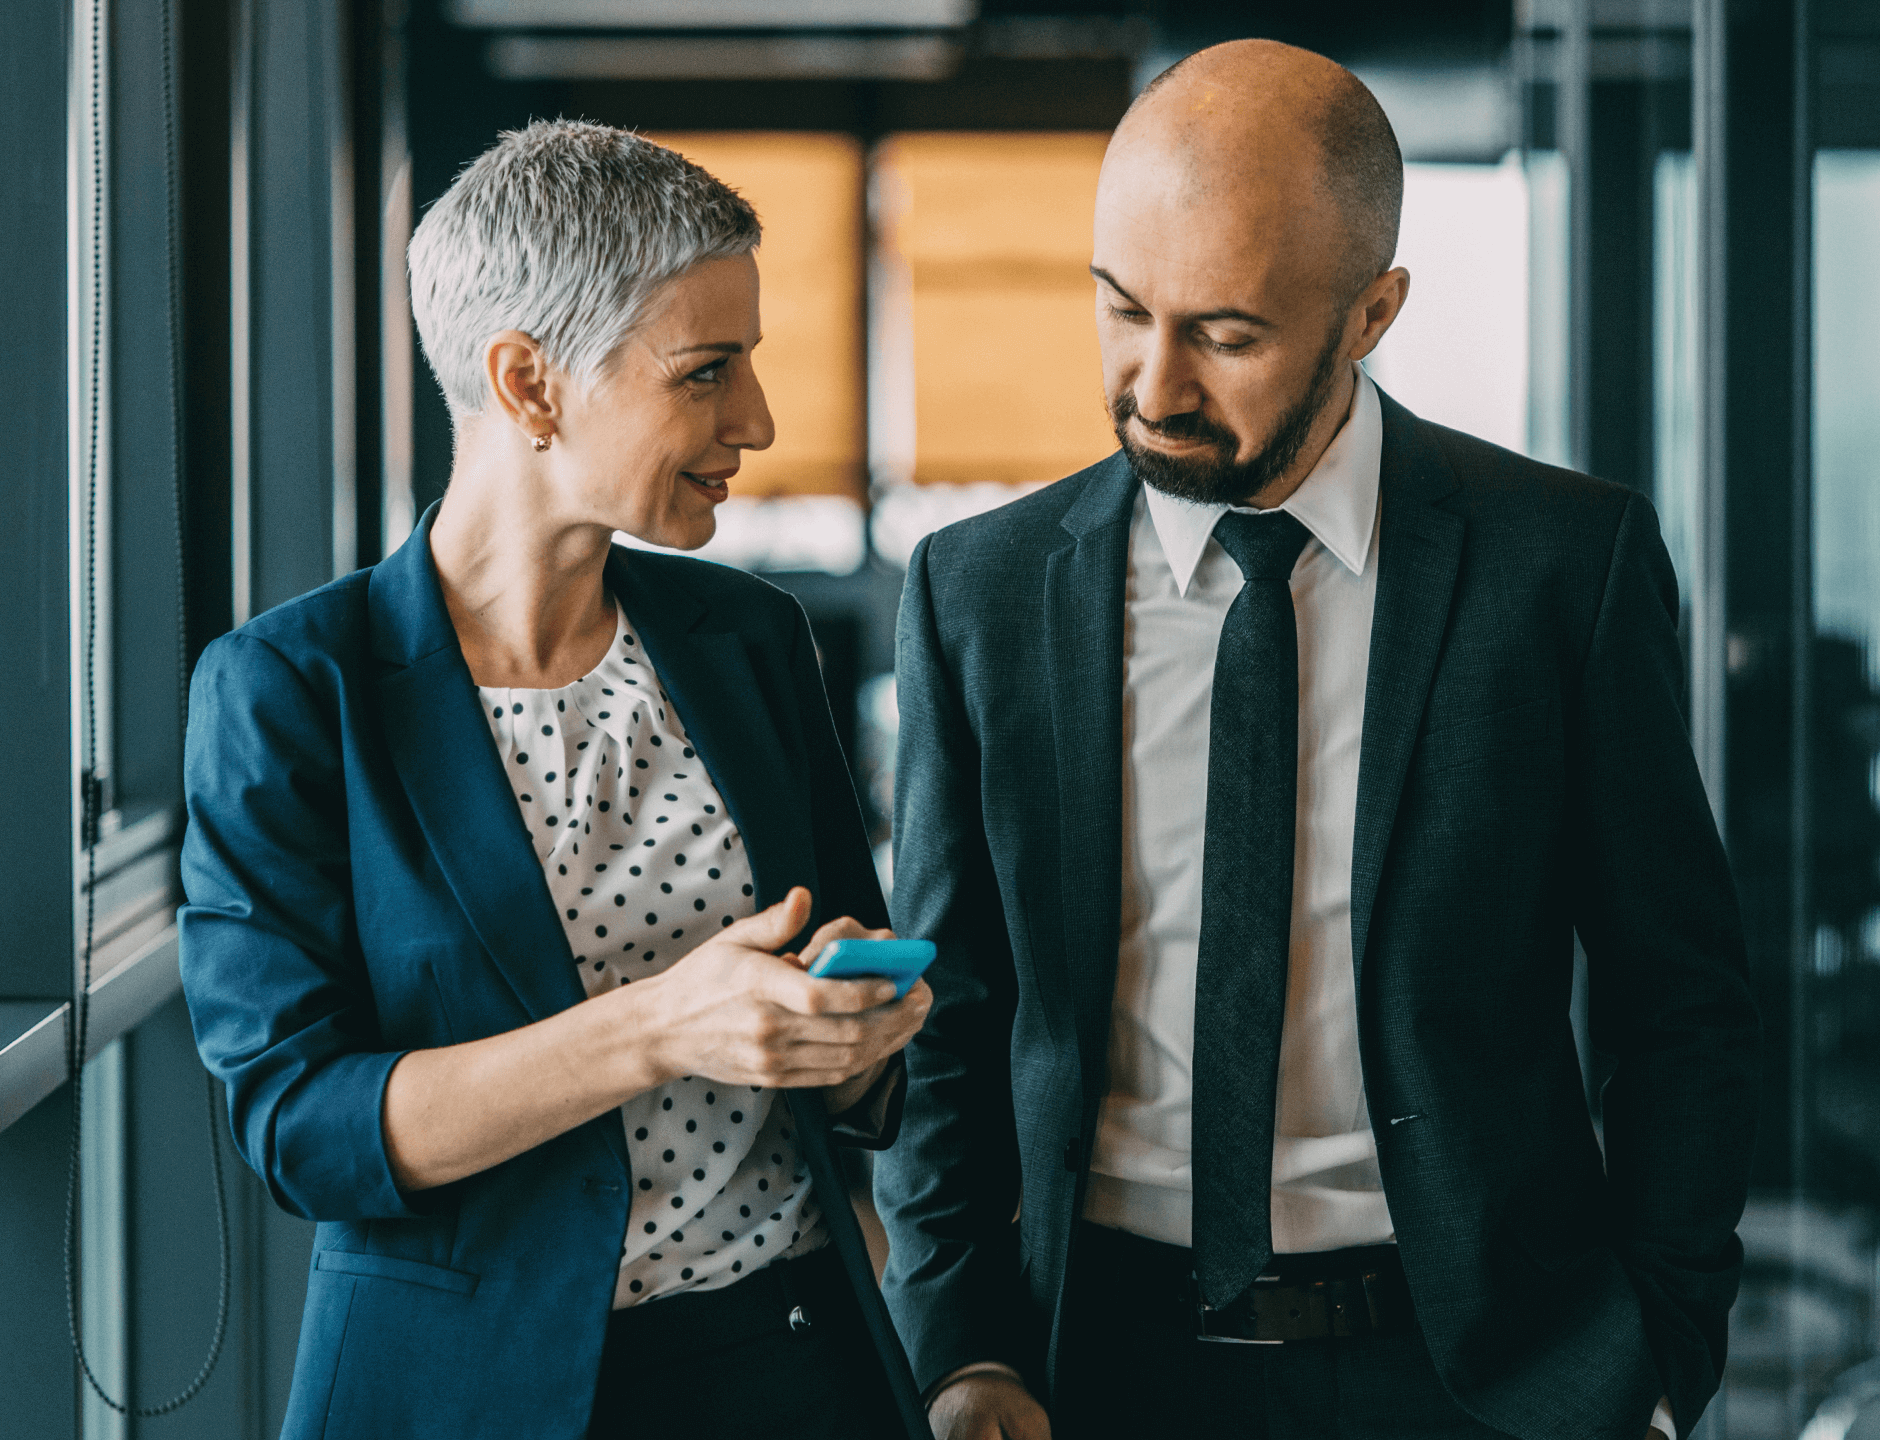 mature man and woman in office setting talking with one looking at mobile phone